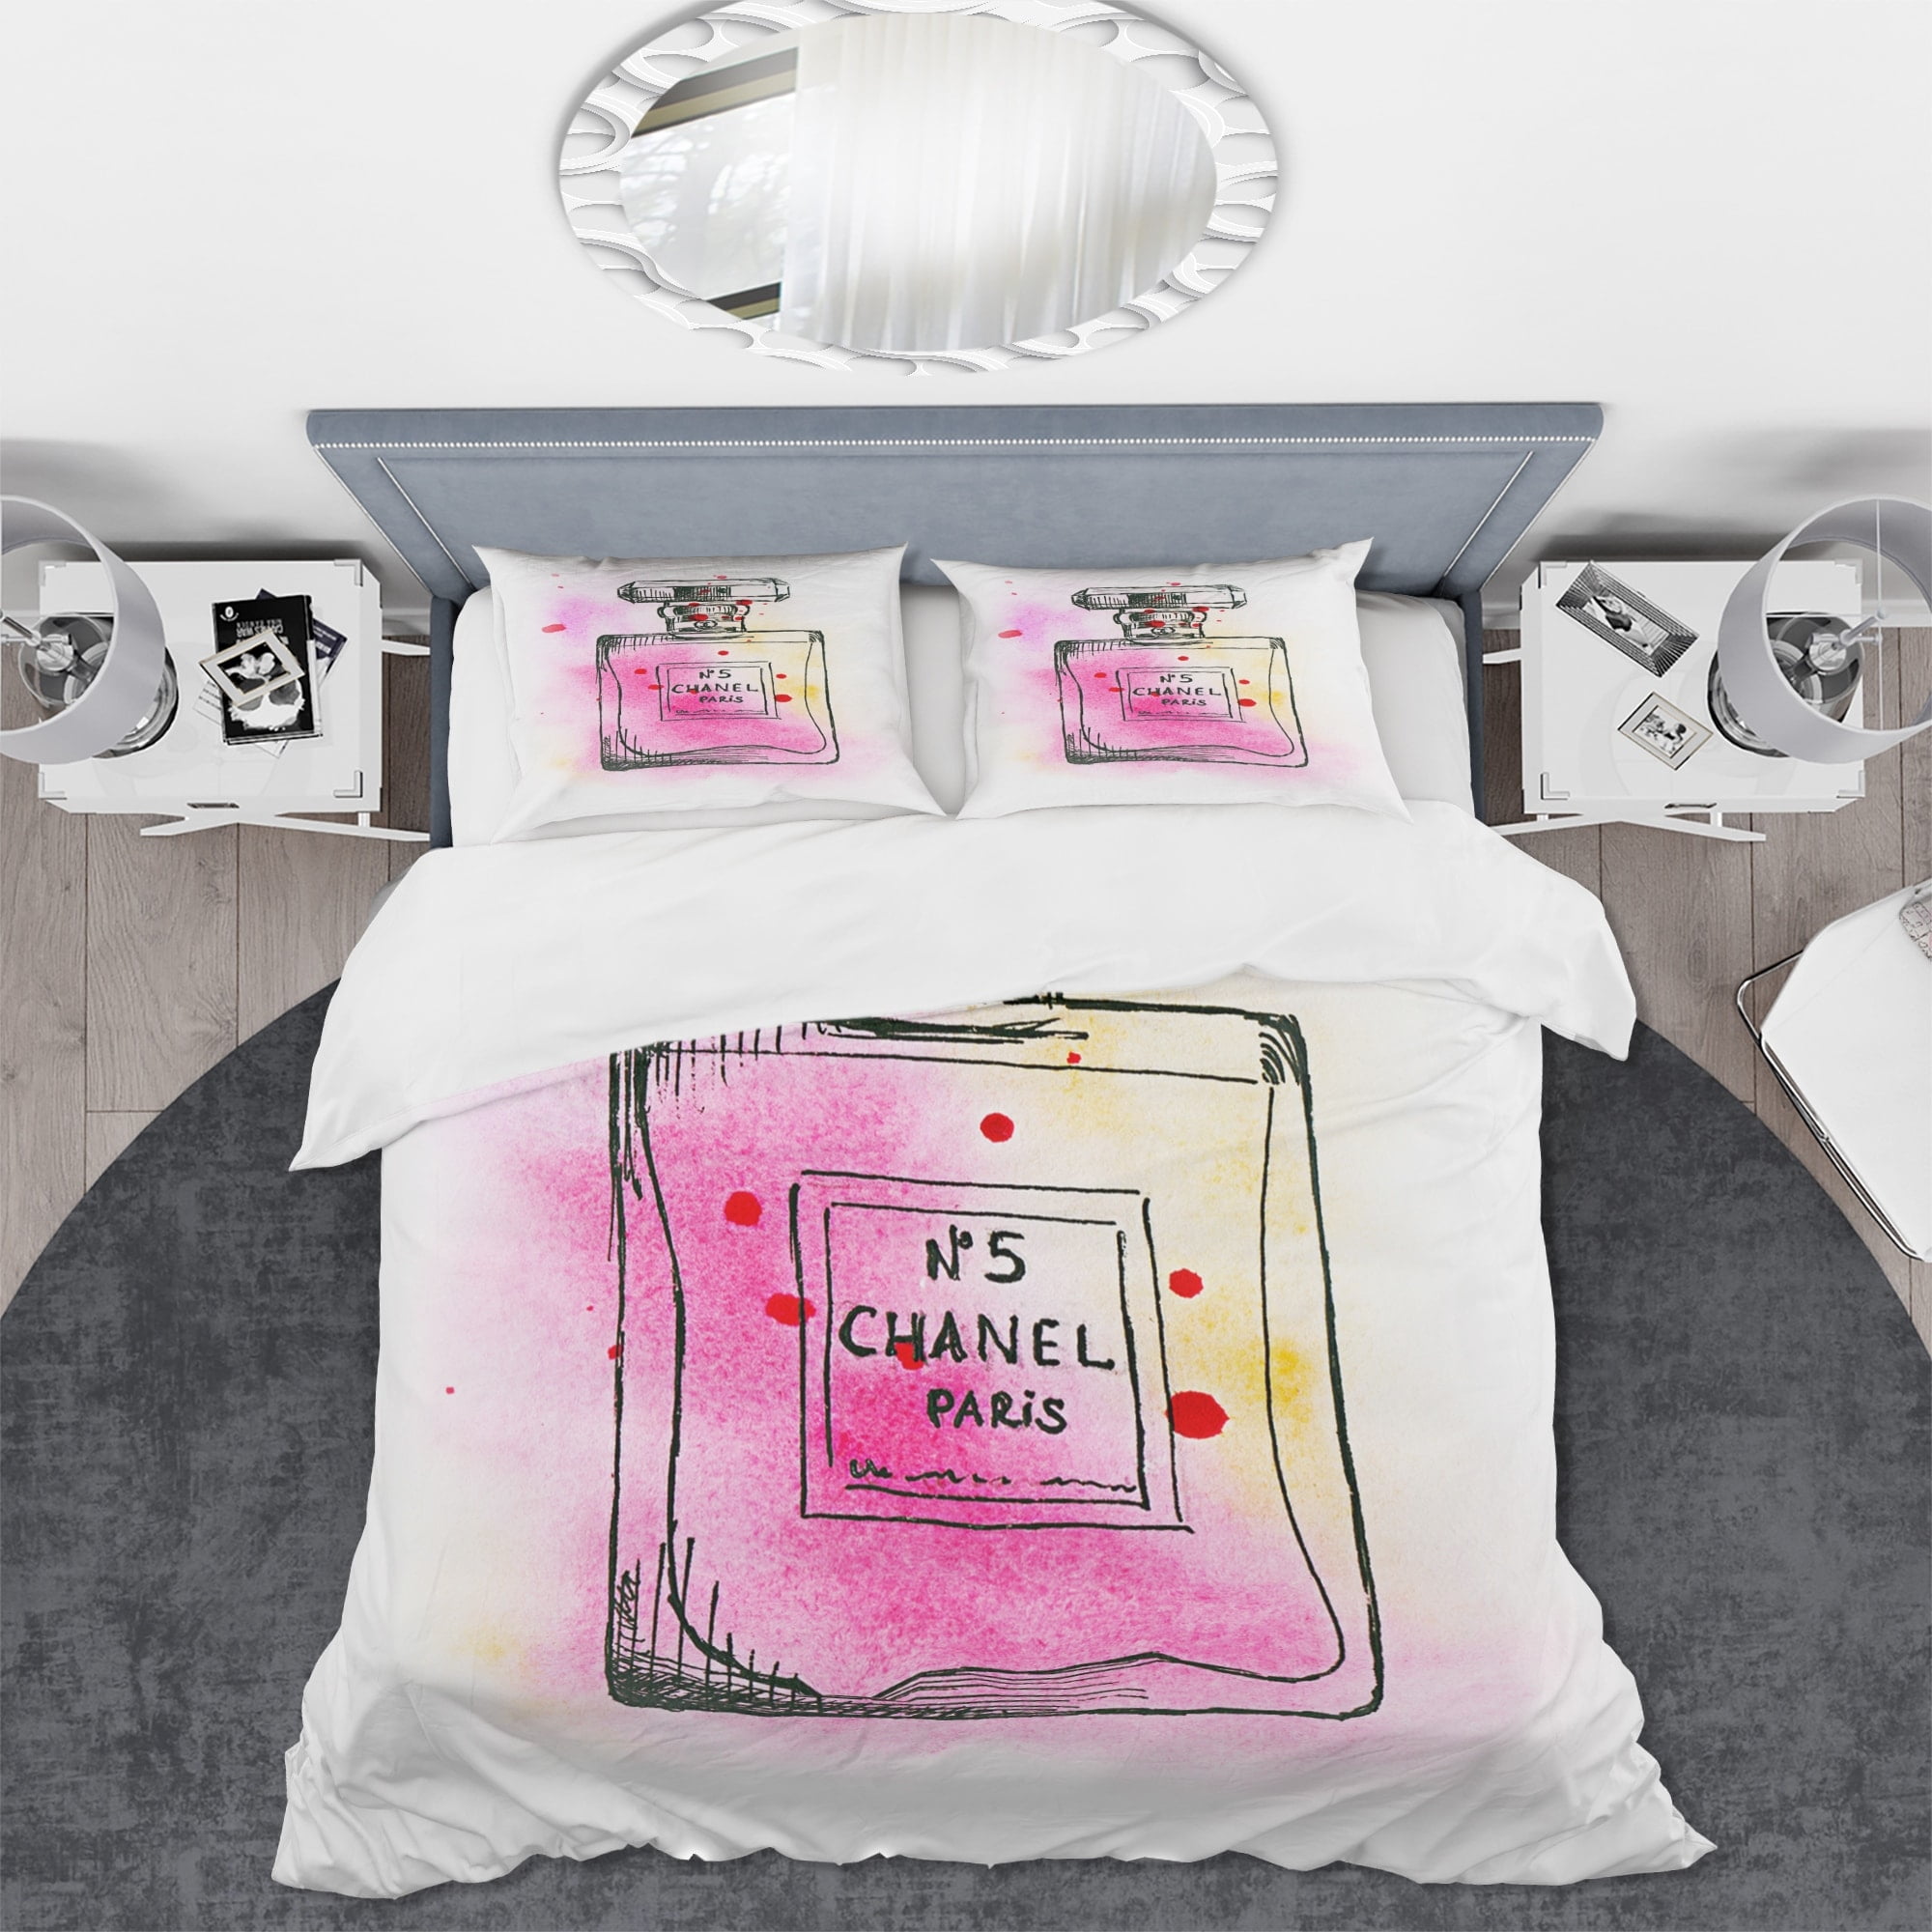 Channel bedding sets! #Channel #bed